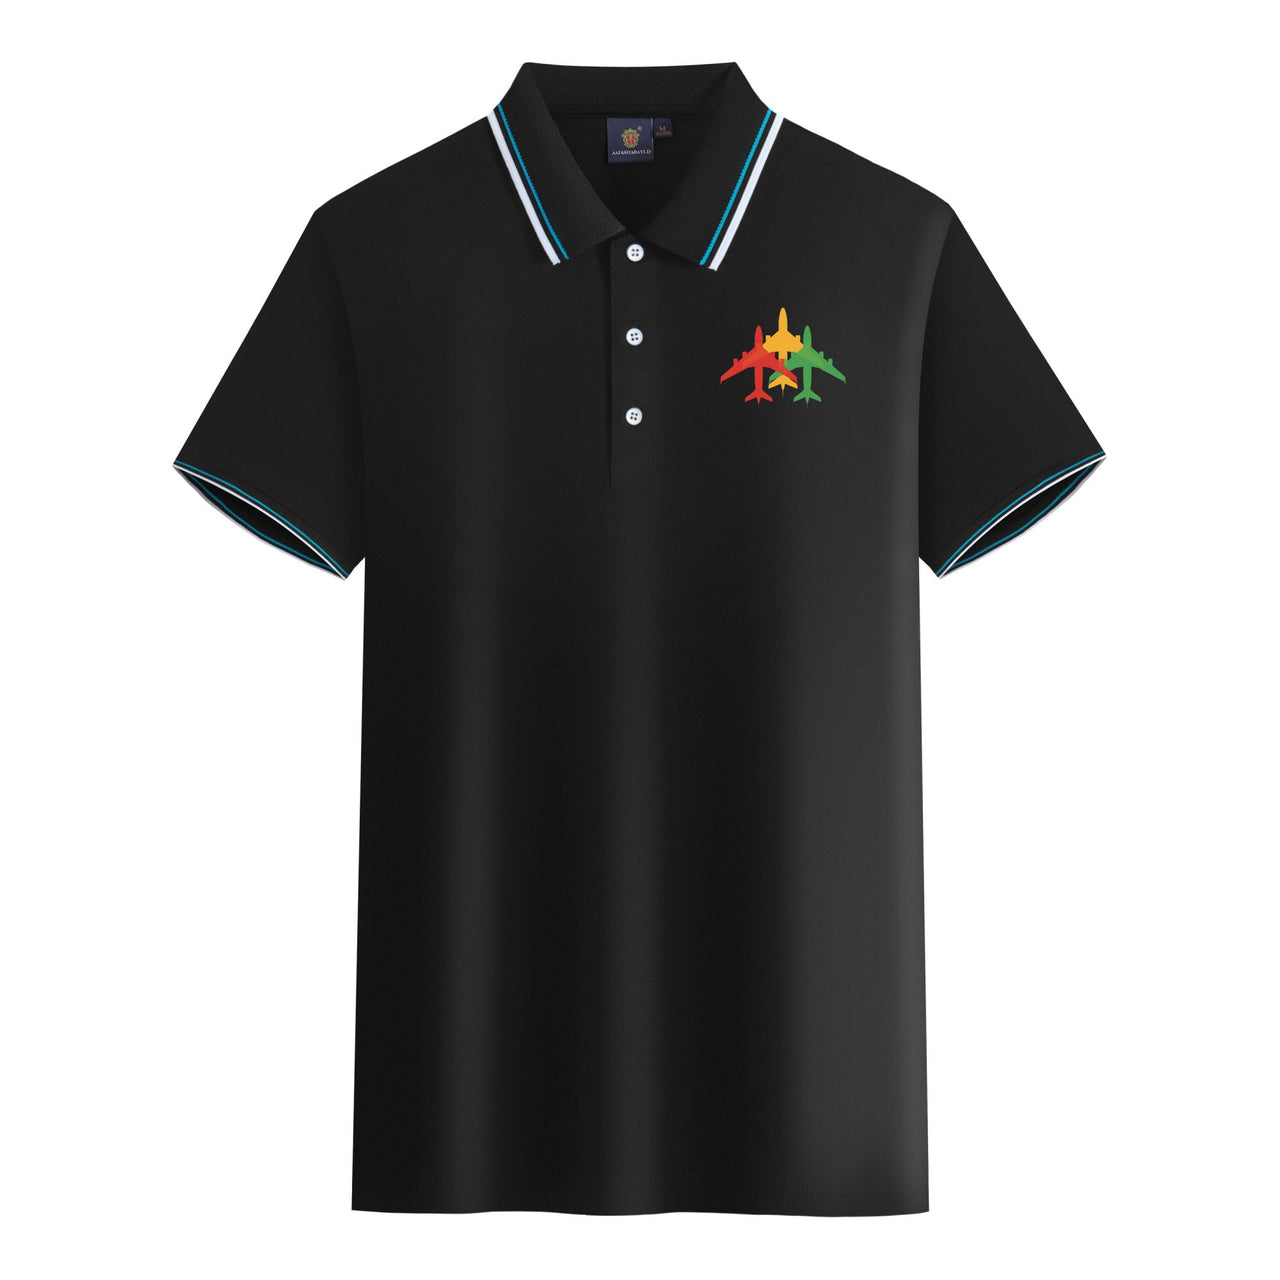 Colourful 3 Airplanes Designed Stylish Polo T-Shirts